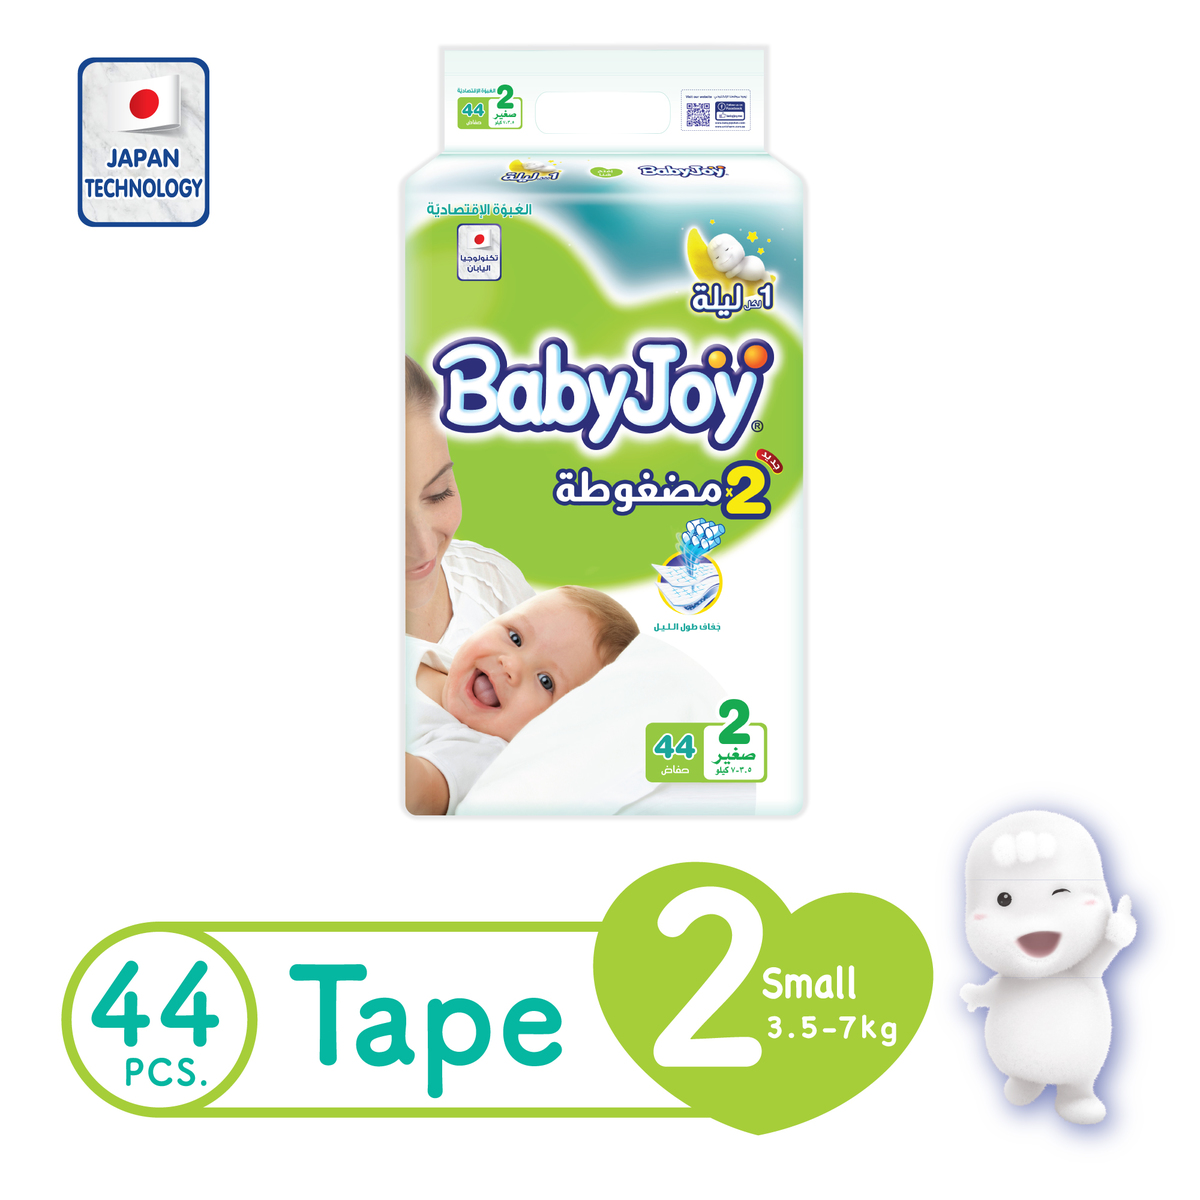 BabyJoy Compressed Tape Diaper Size 2 Small Value Pack 3.5 - 7kg 44 Count